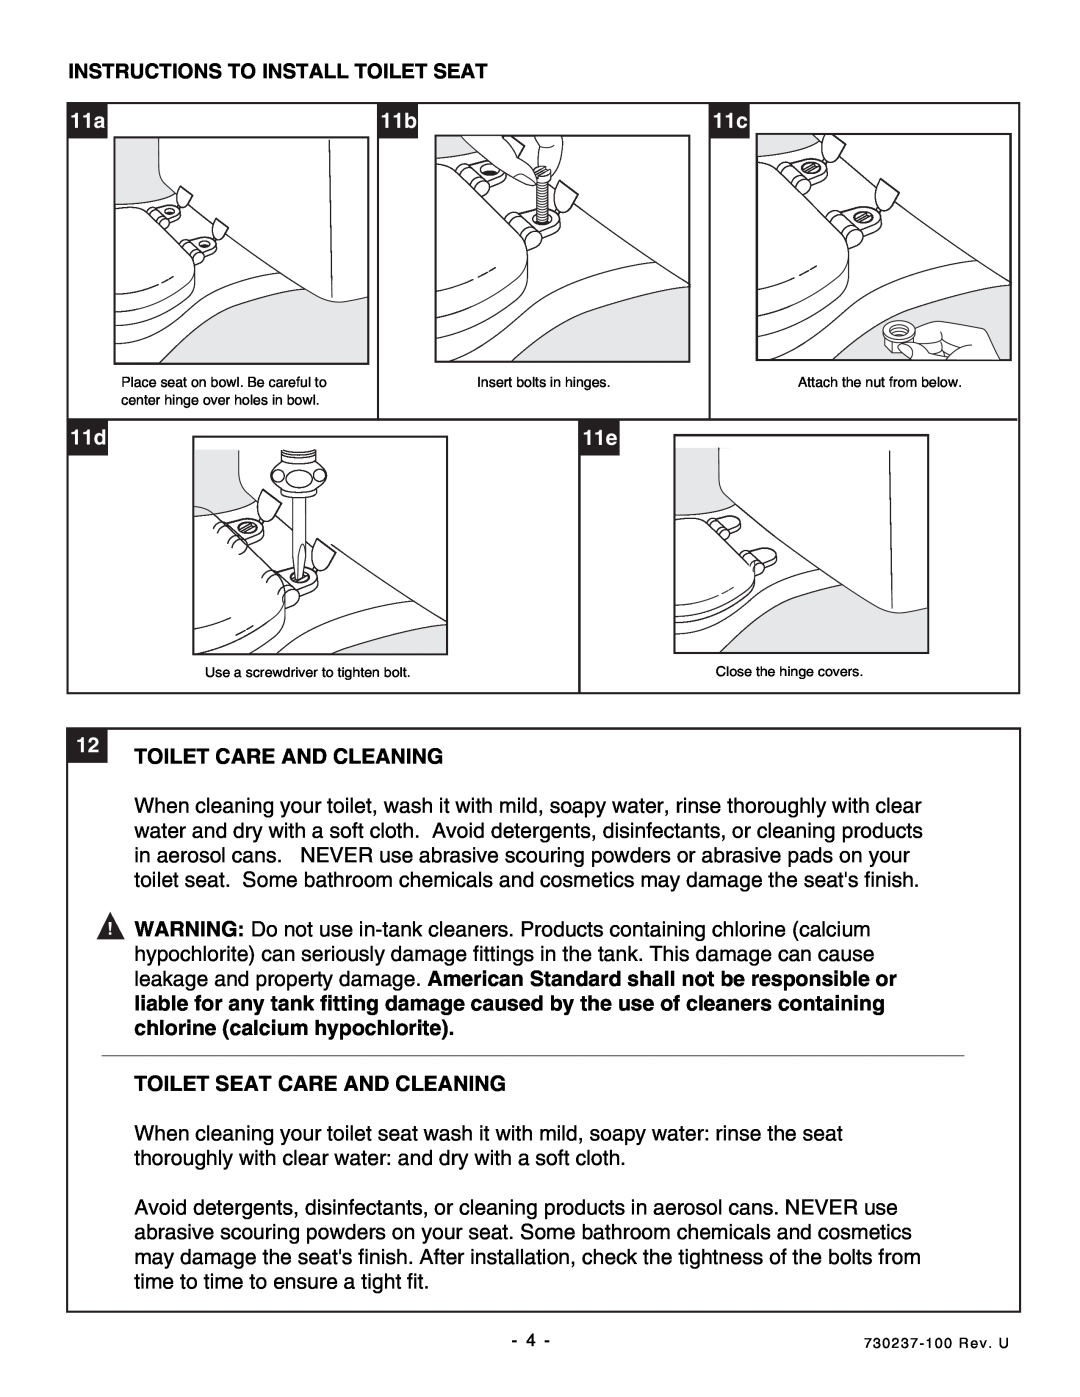 American Standard 2444 Instructions To Install Toilet Seat, 12TOILET CARE AND CLEANING, Toilet Seat Care And Cleaning 